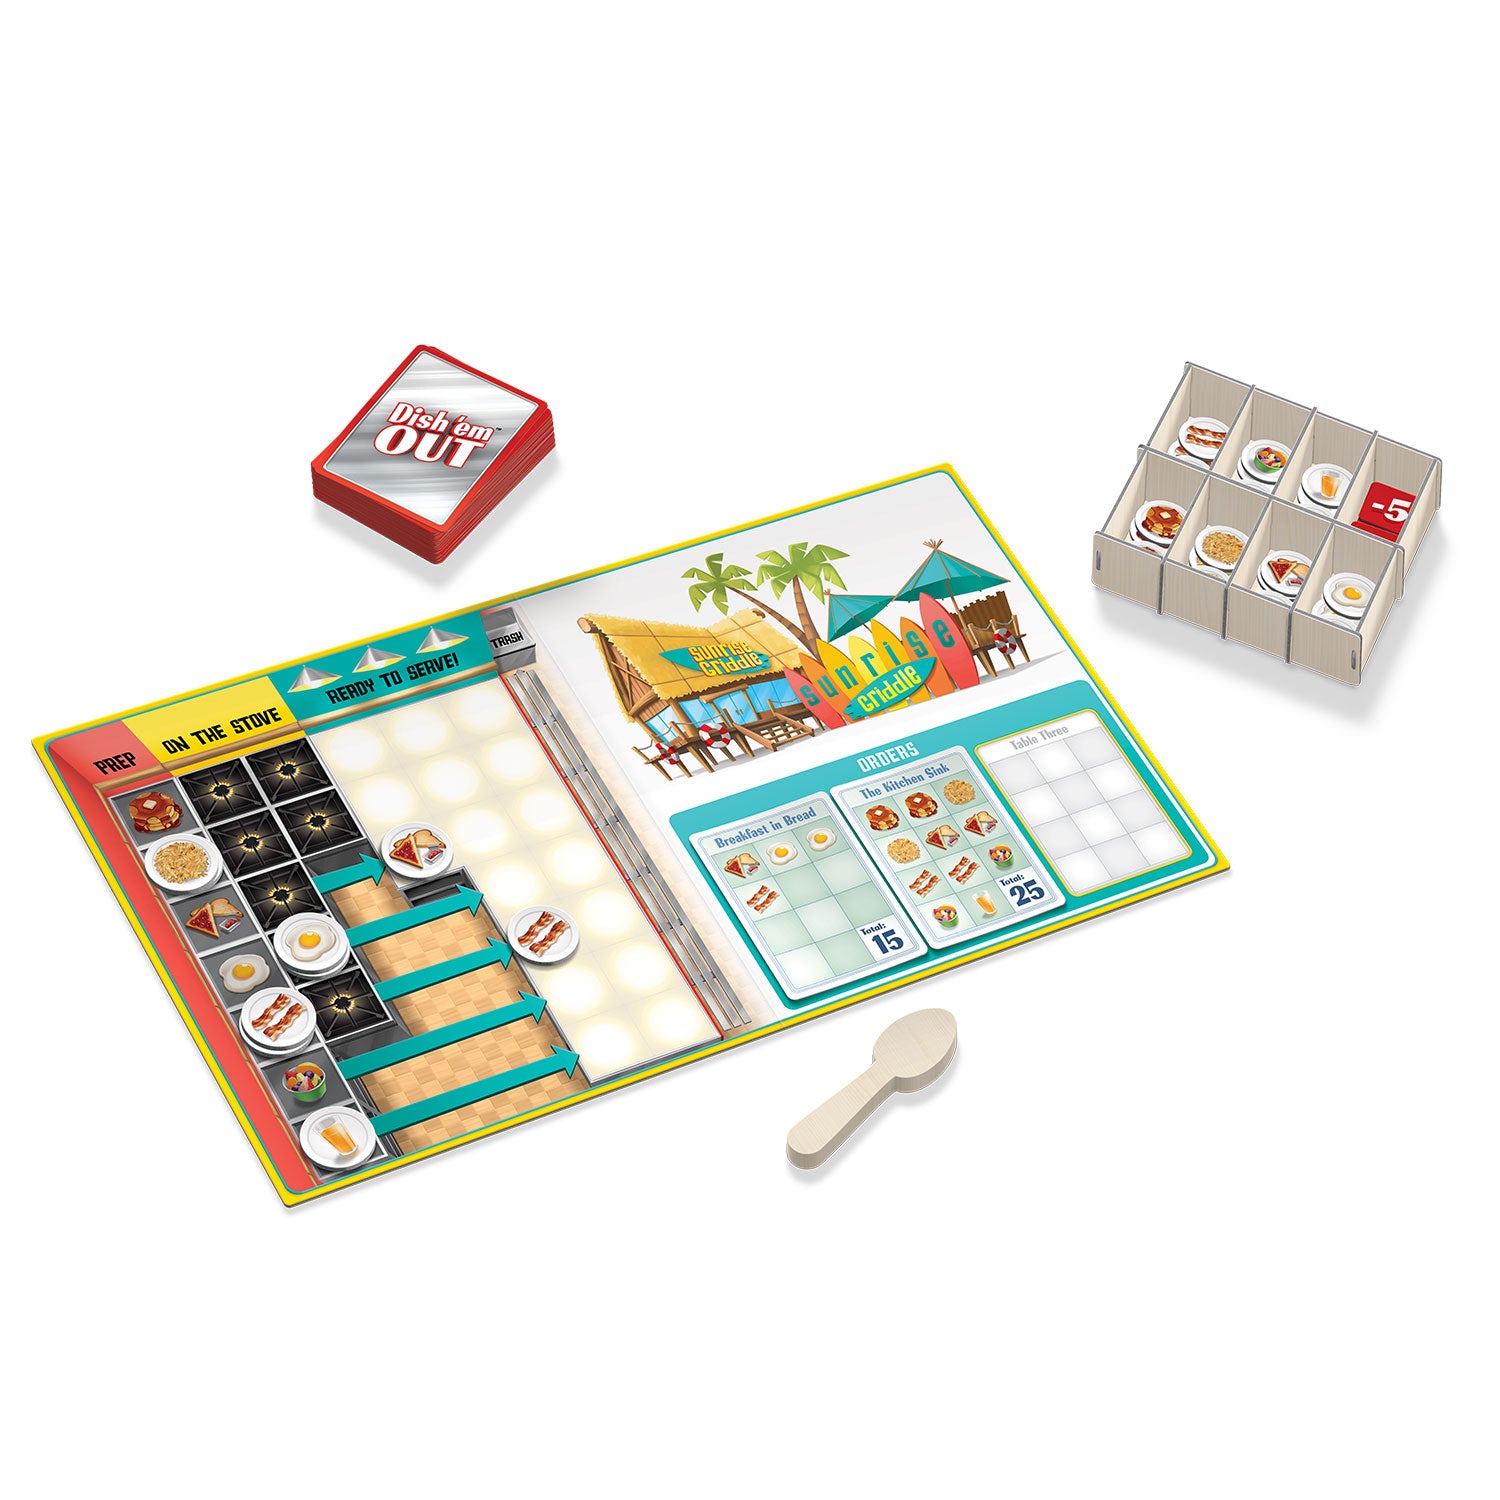 Dish 'em Out by SimplyFun is a fun restaurant and diner strategy game for ages 8 and up